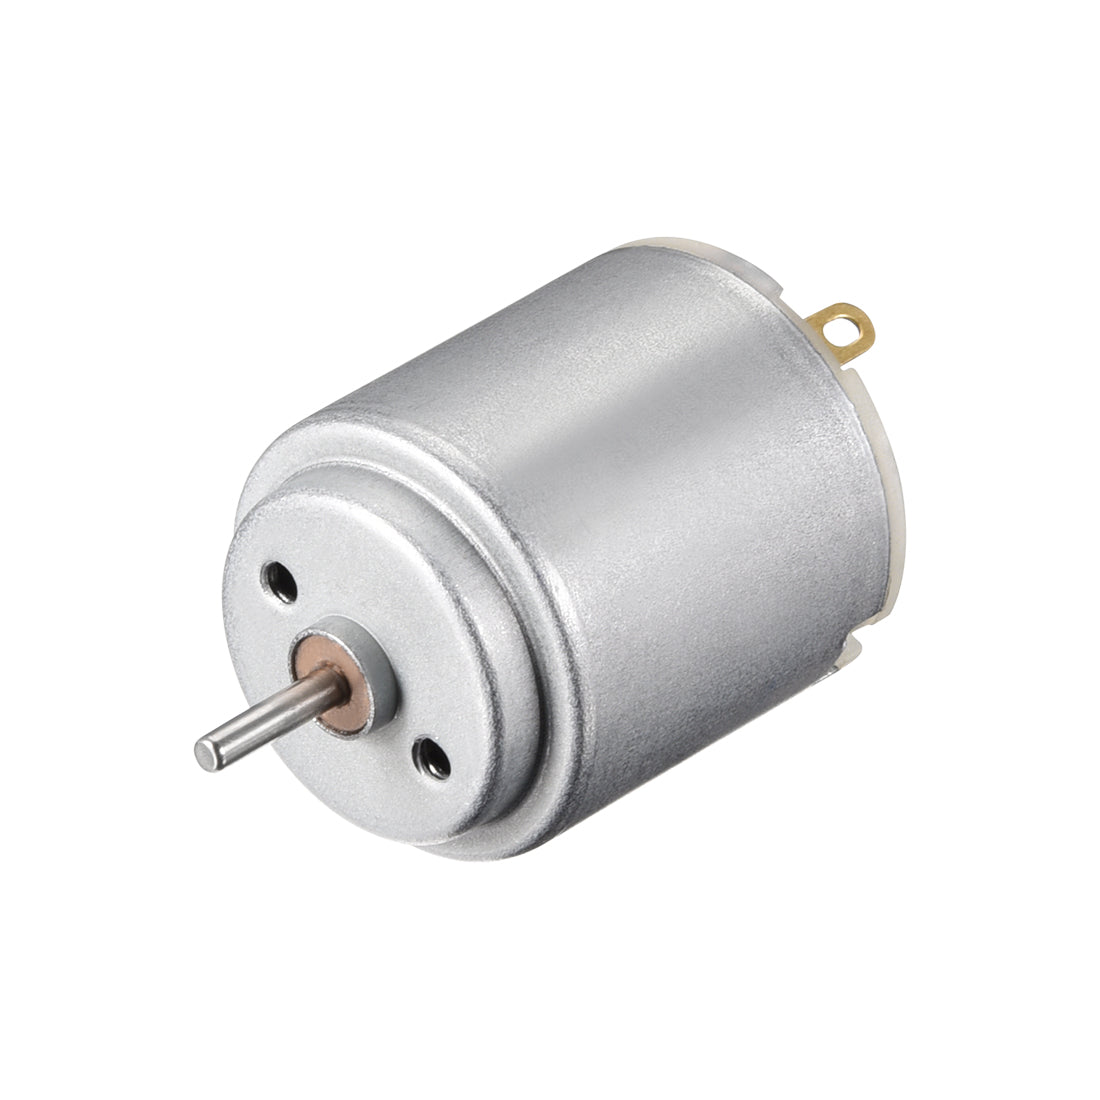 uxcell Uxcell Micro Motor DC 1.5V 6100-6500RPM High Speed Motor for DIY RC Cars Remote Control